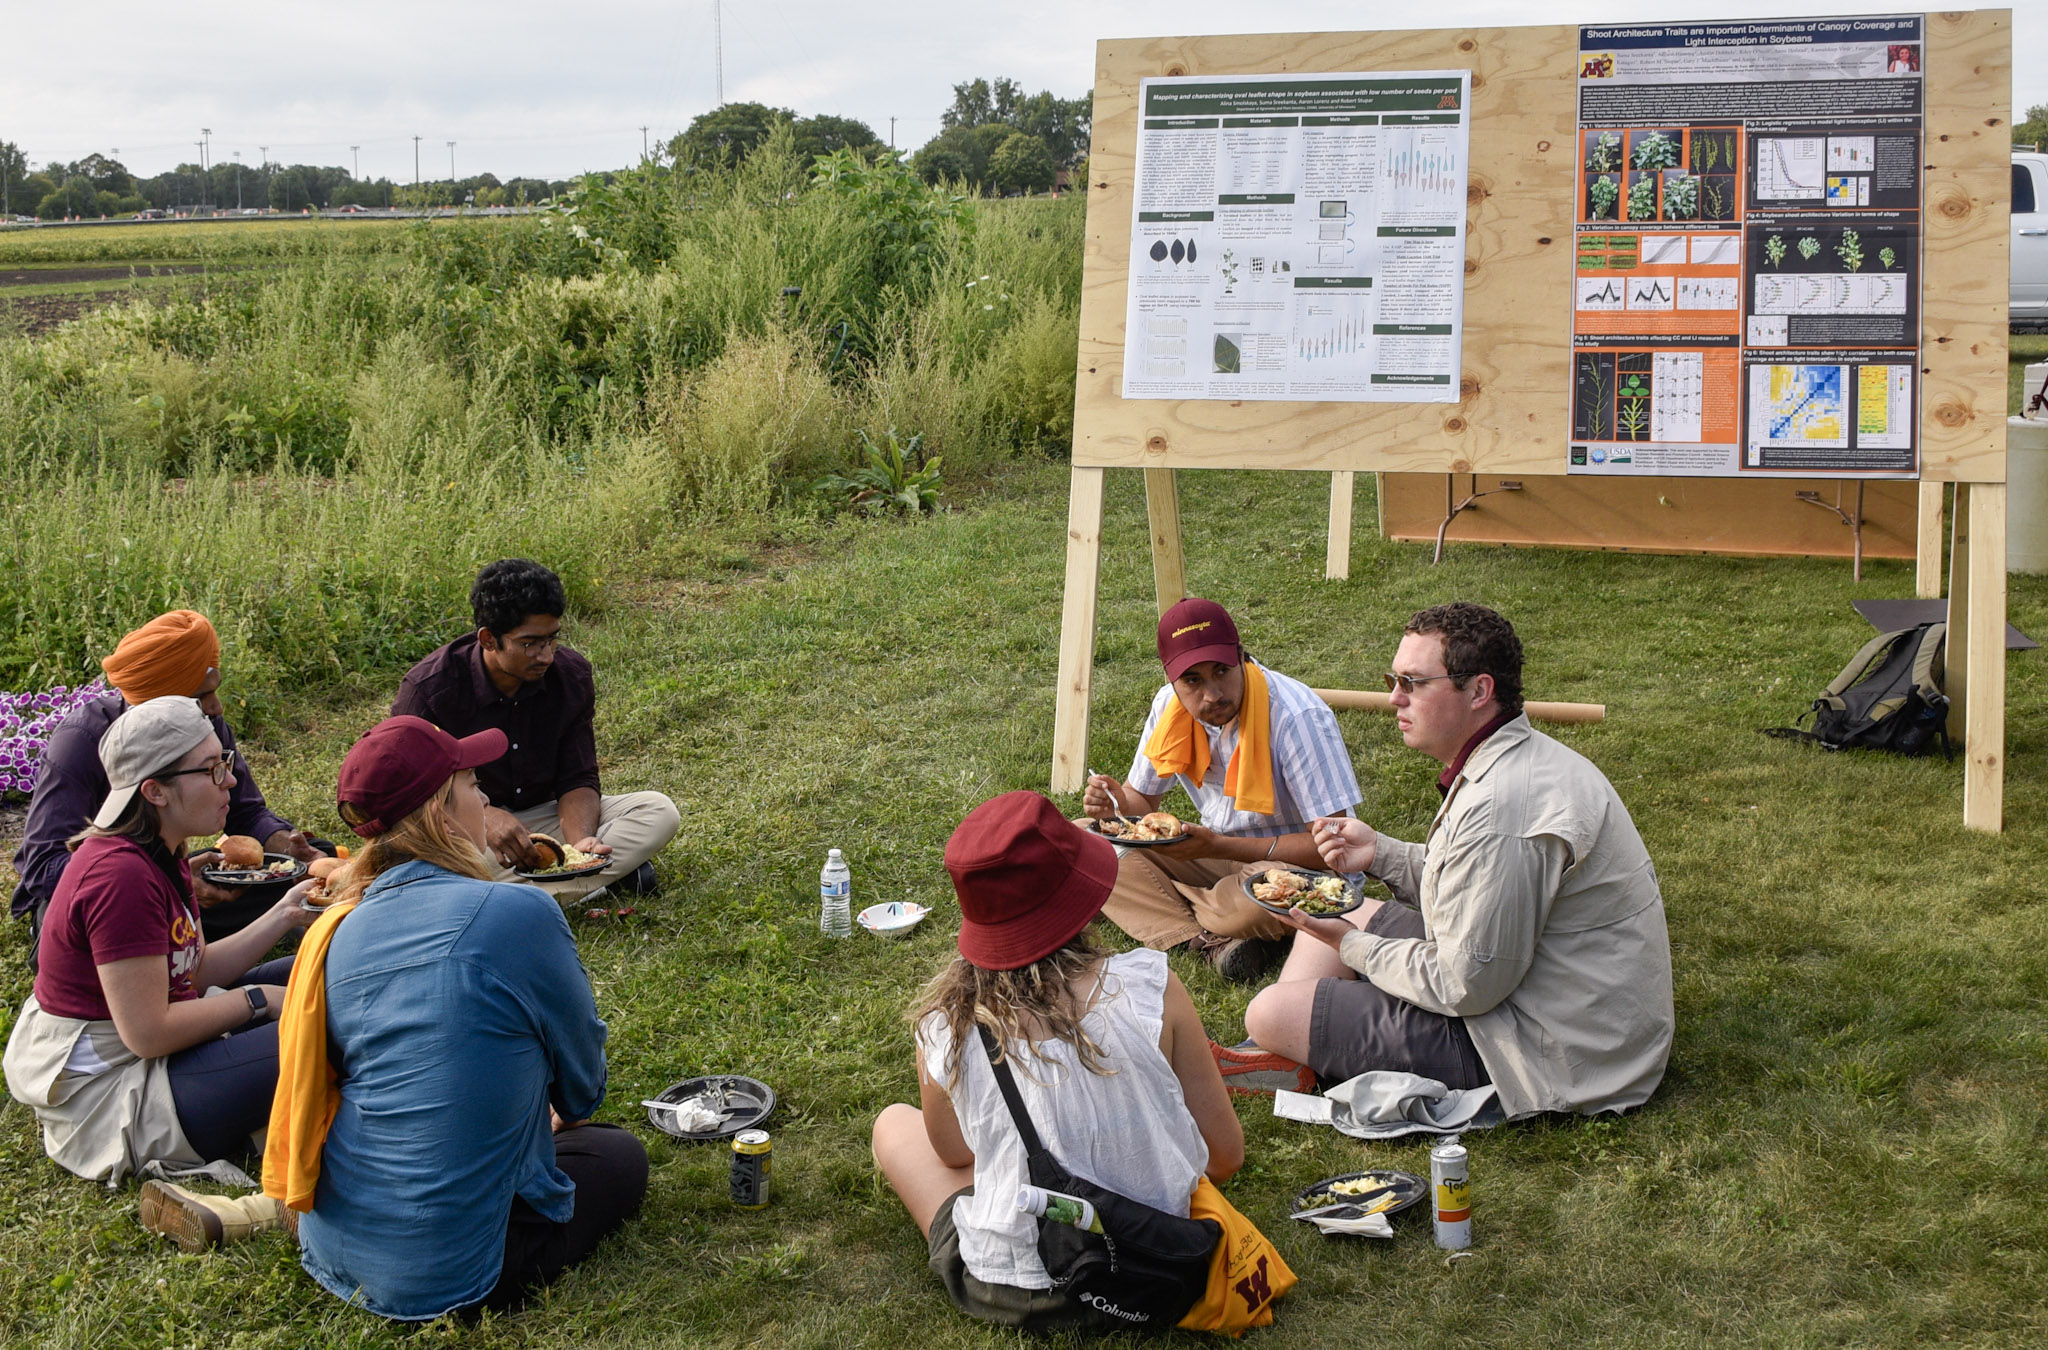 several people sit in grass eating in front of scientific posters